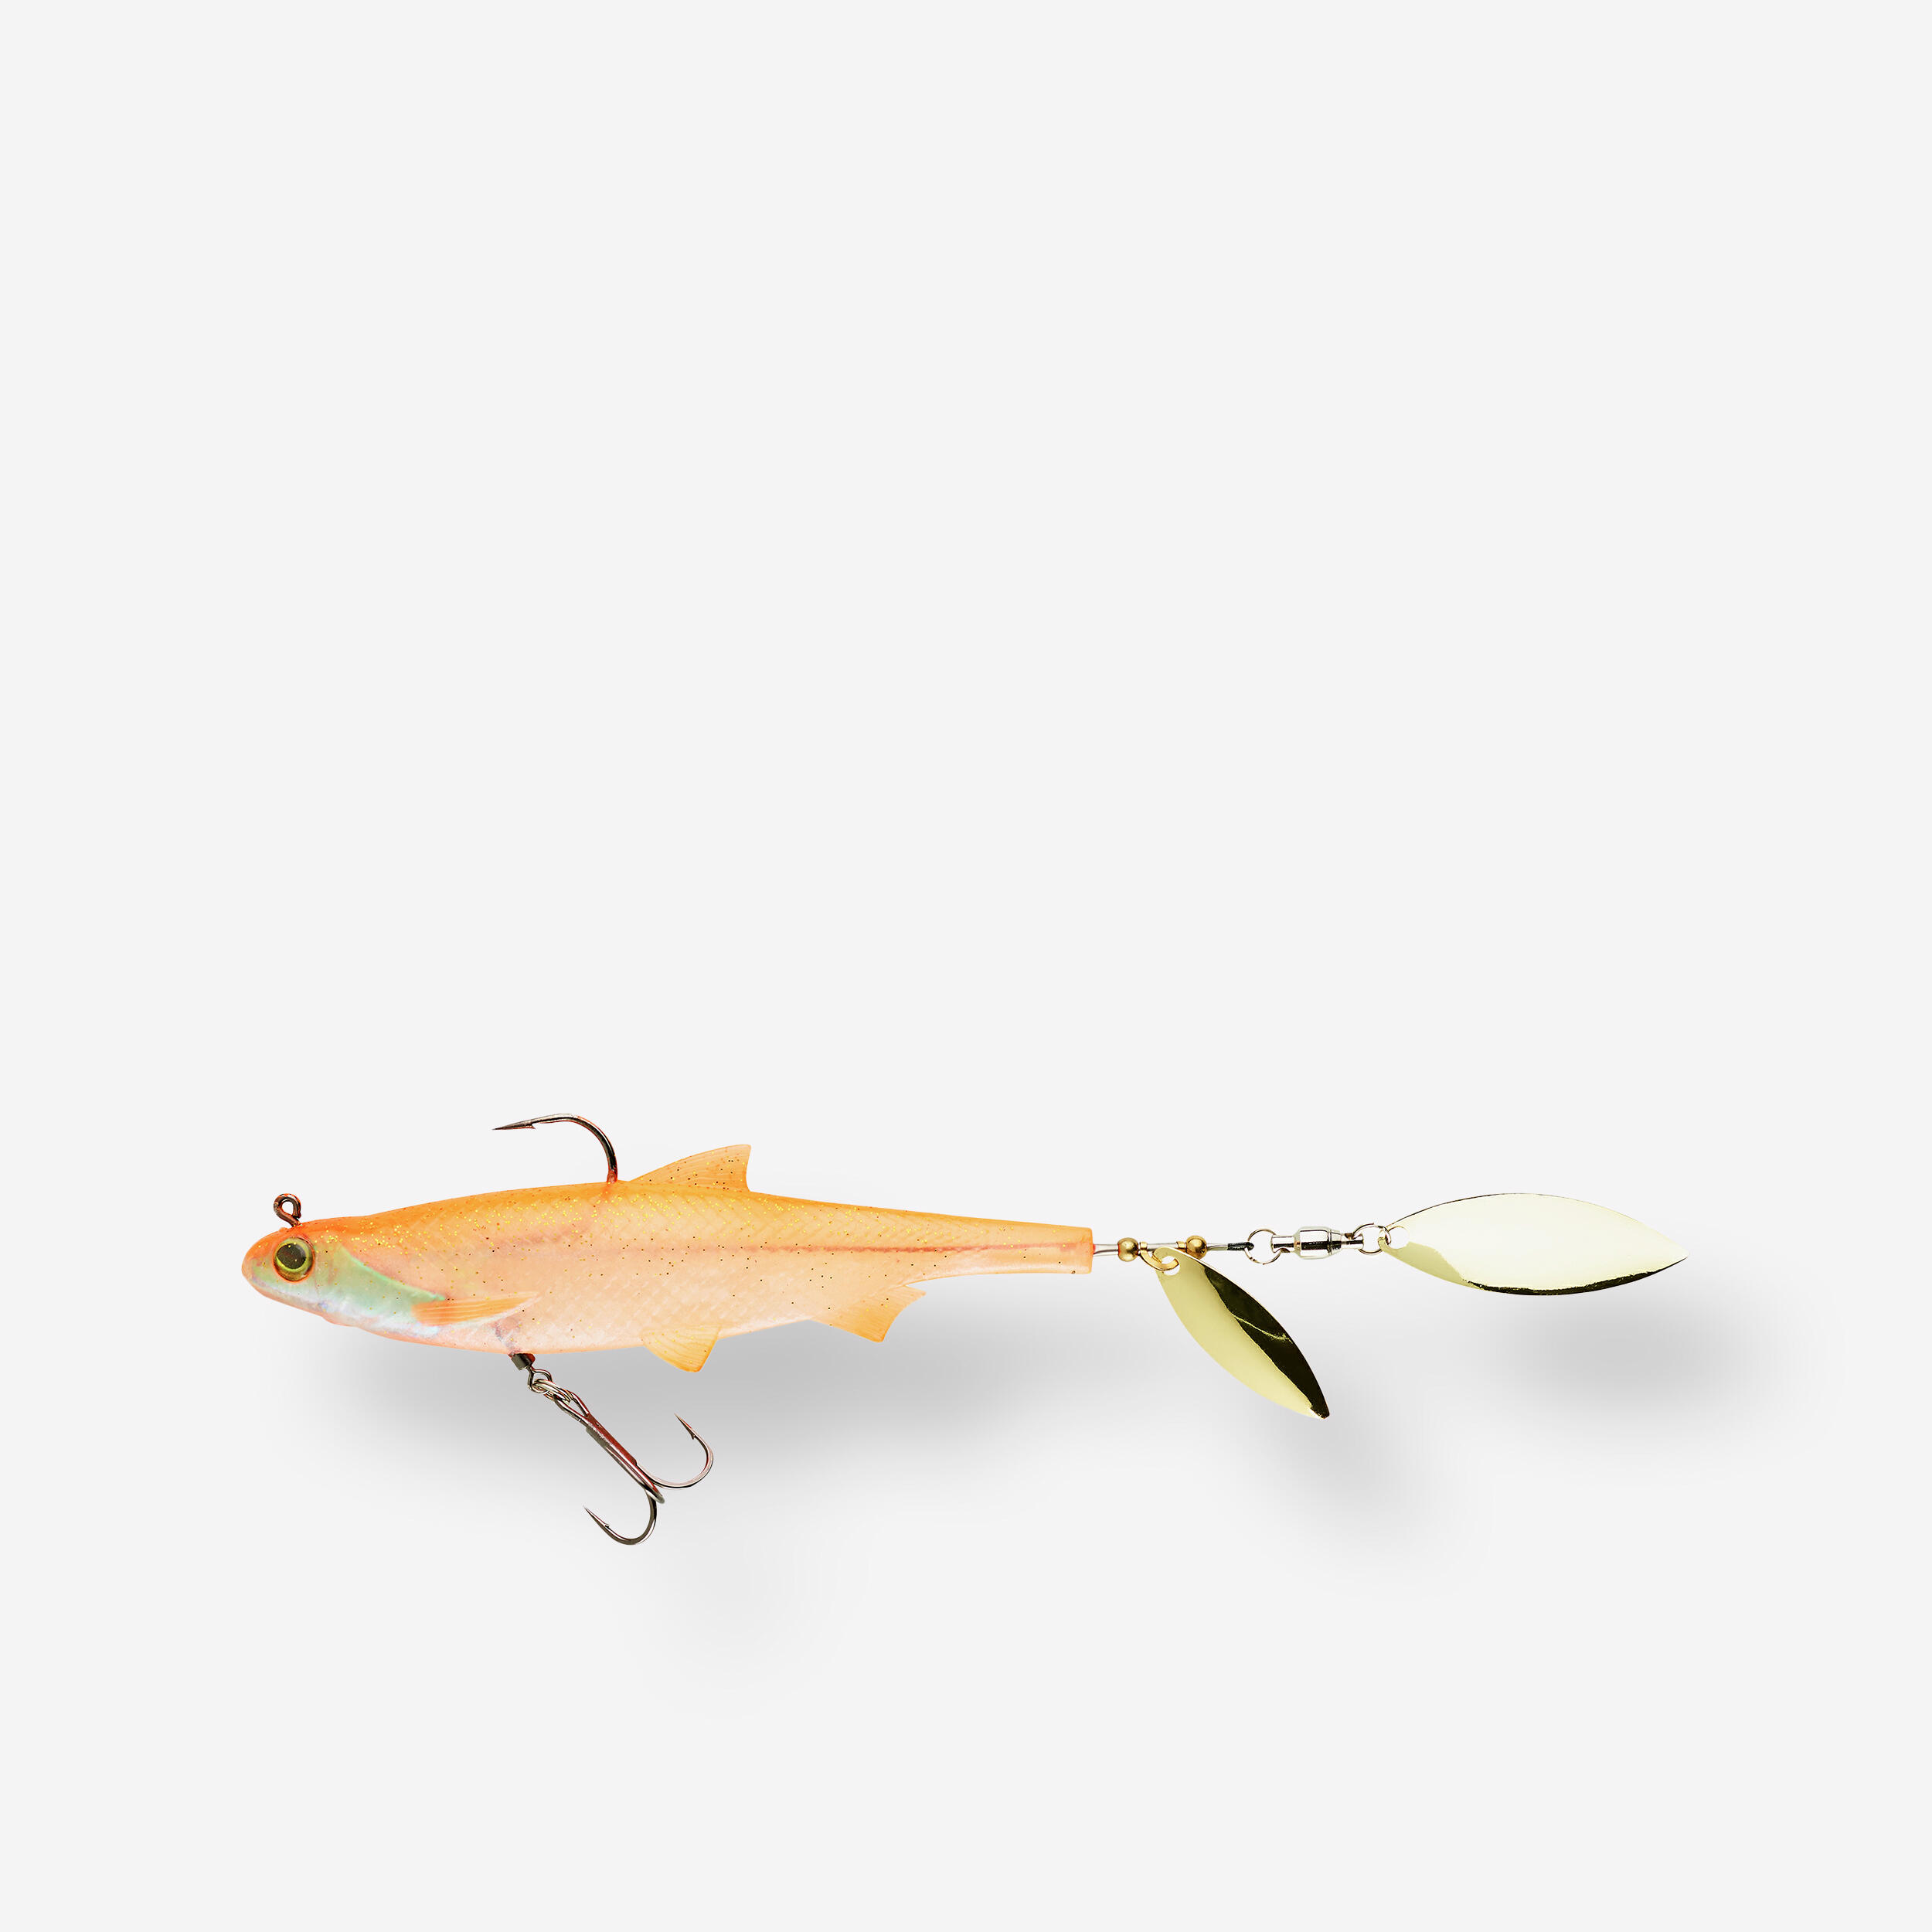 LURE FISHING ROACHSPIN 120 ORANGE BLADED SHAD SOFT LURE 1/2